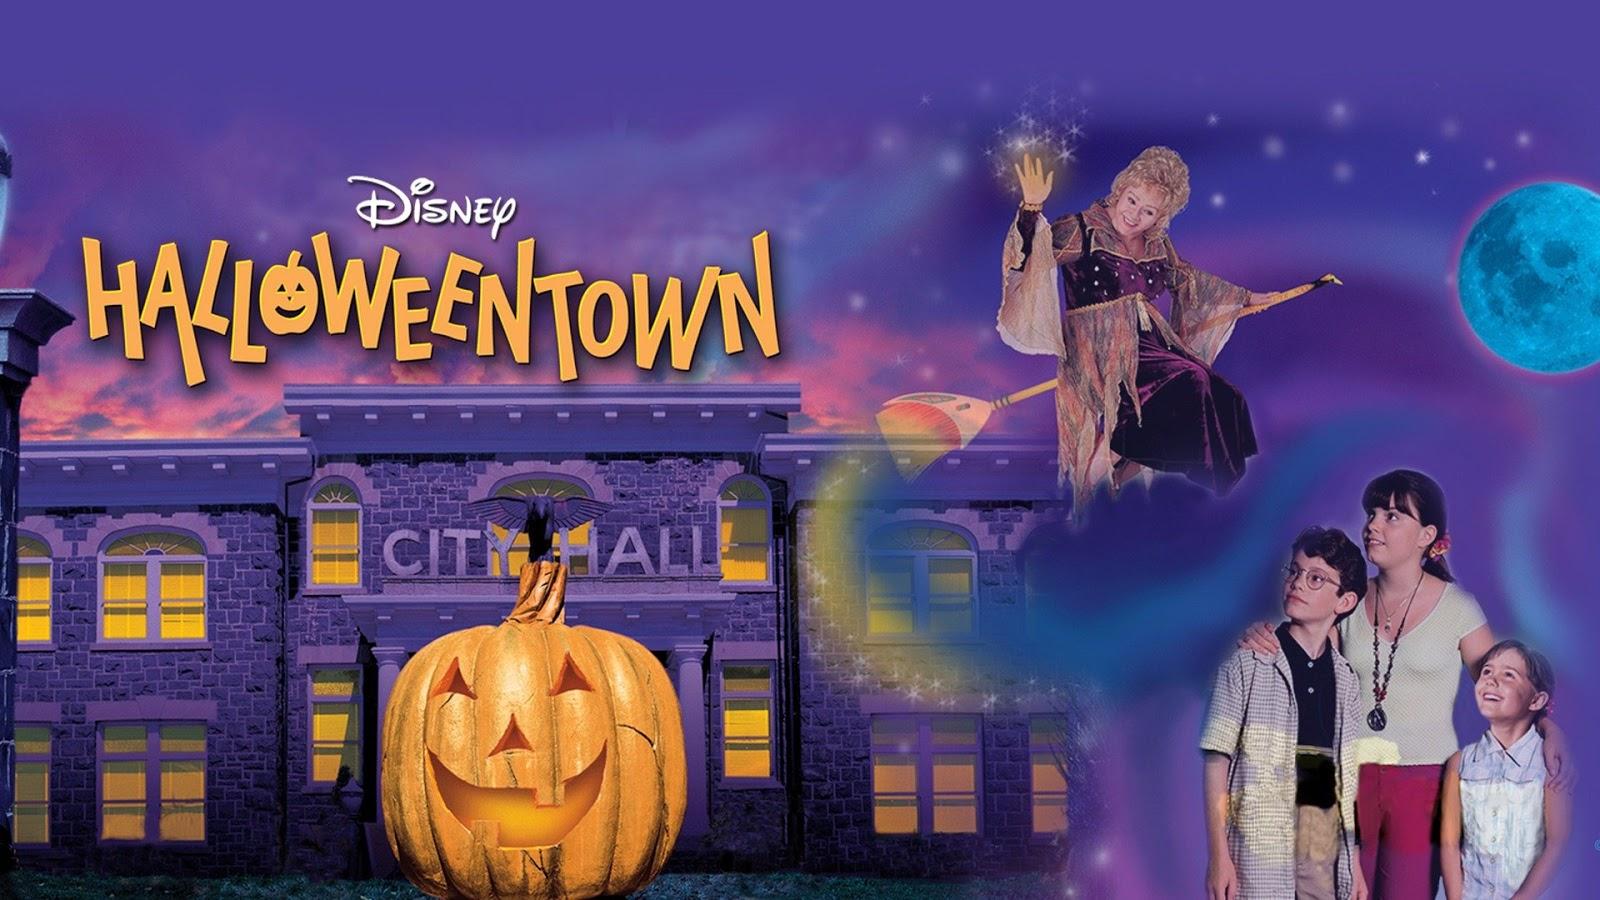 Halloweentown. All About Animation